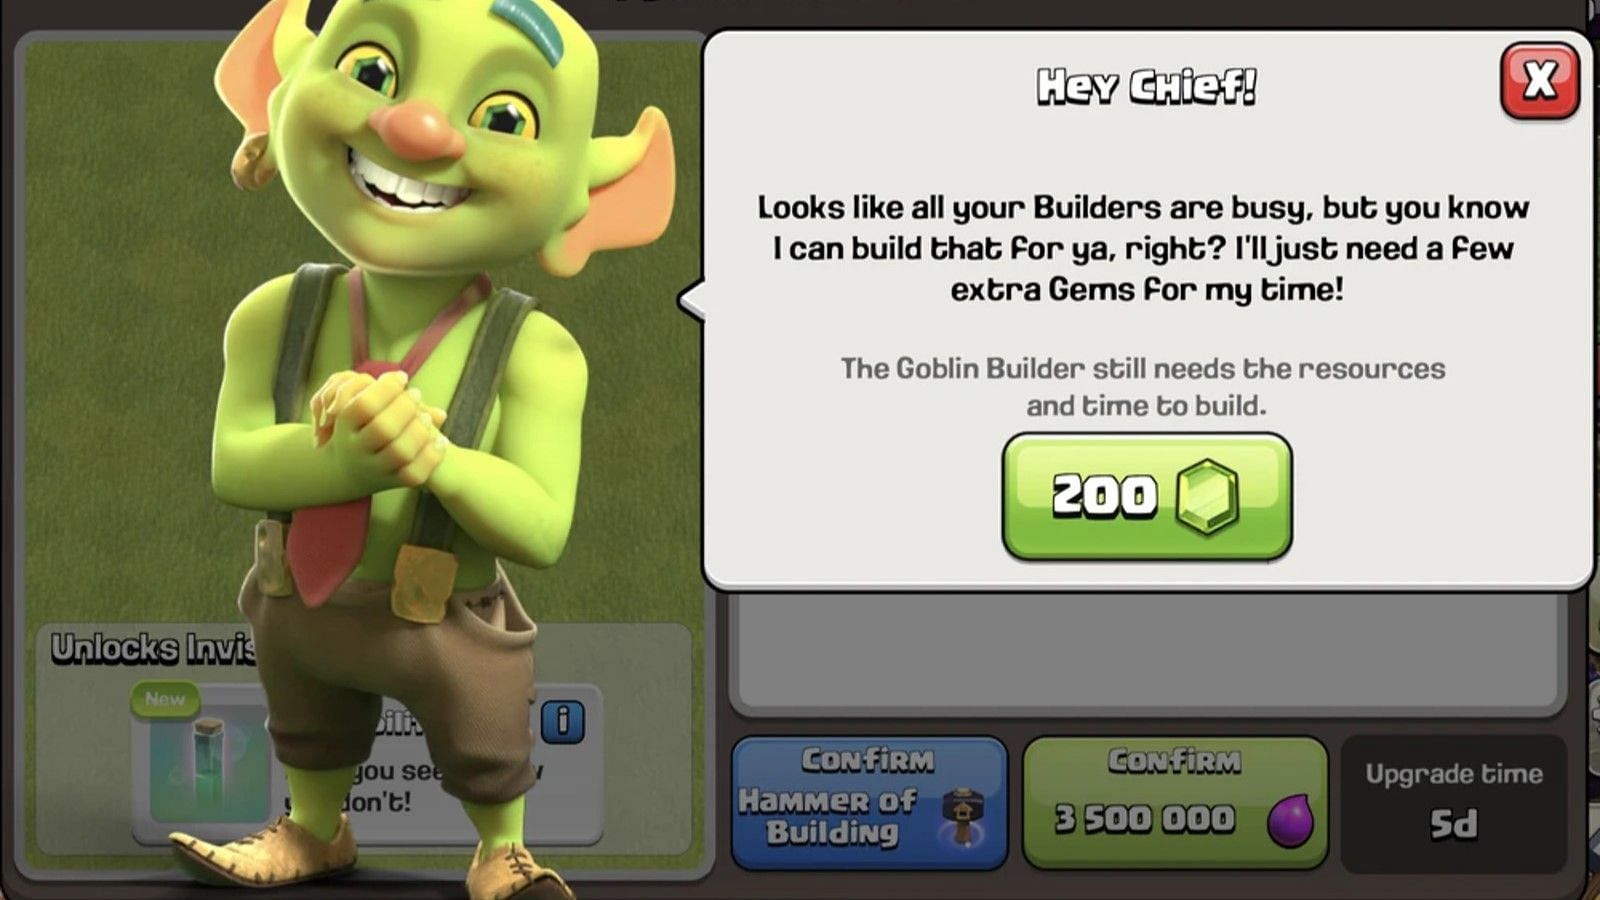 Goblin Builder cost (Image via Supercell)